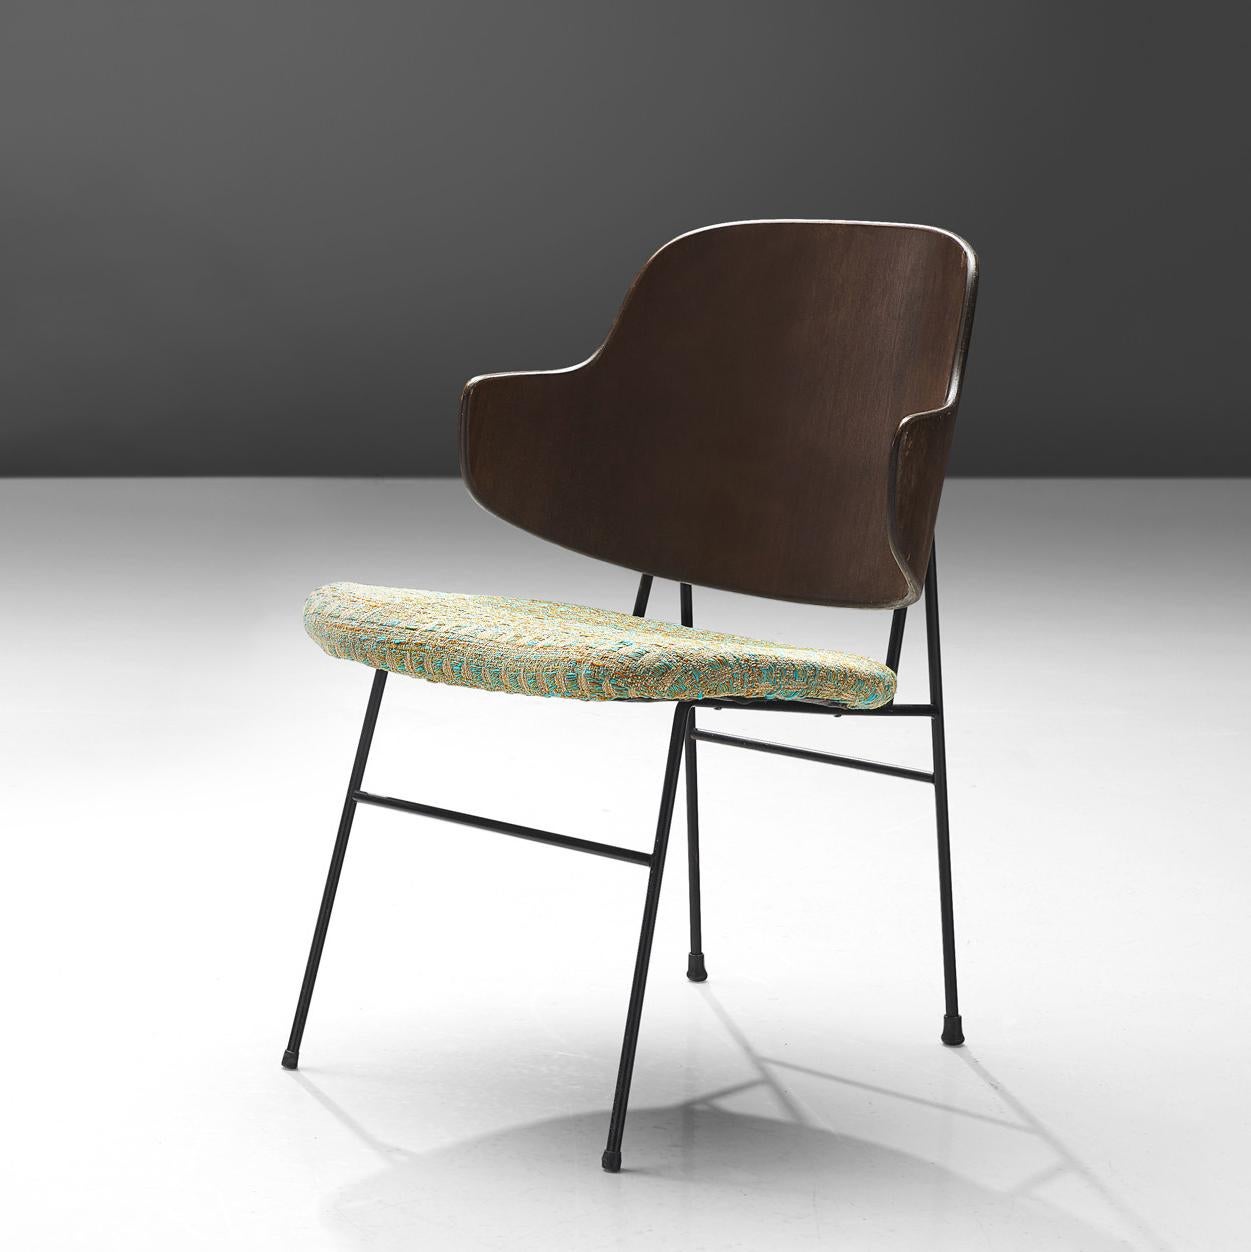 Ib Kofod-Larsen, 'Penguin' chair, walnut, steel, metal, Denmark, design 1953, production, 1960s

This 'Penguin' chair was designed by Ib Kofod-Larsen. The chair was first taken into production by Selig in 1953. The chair is always built up of a